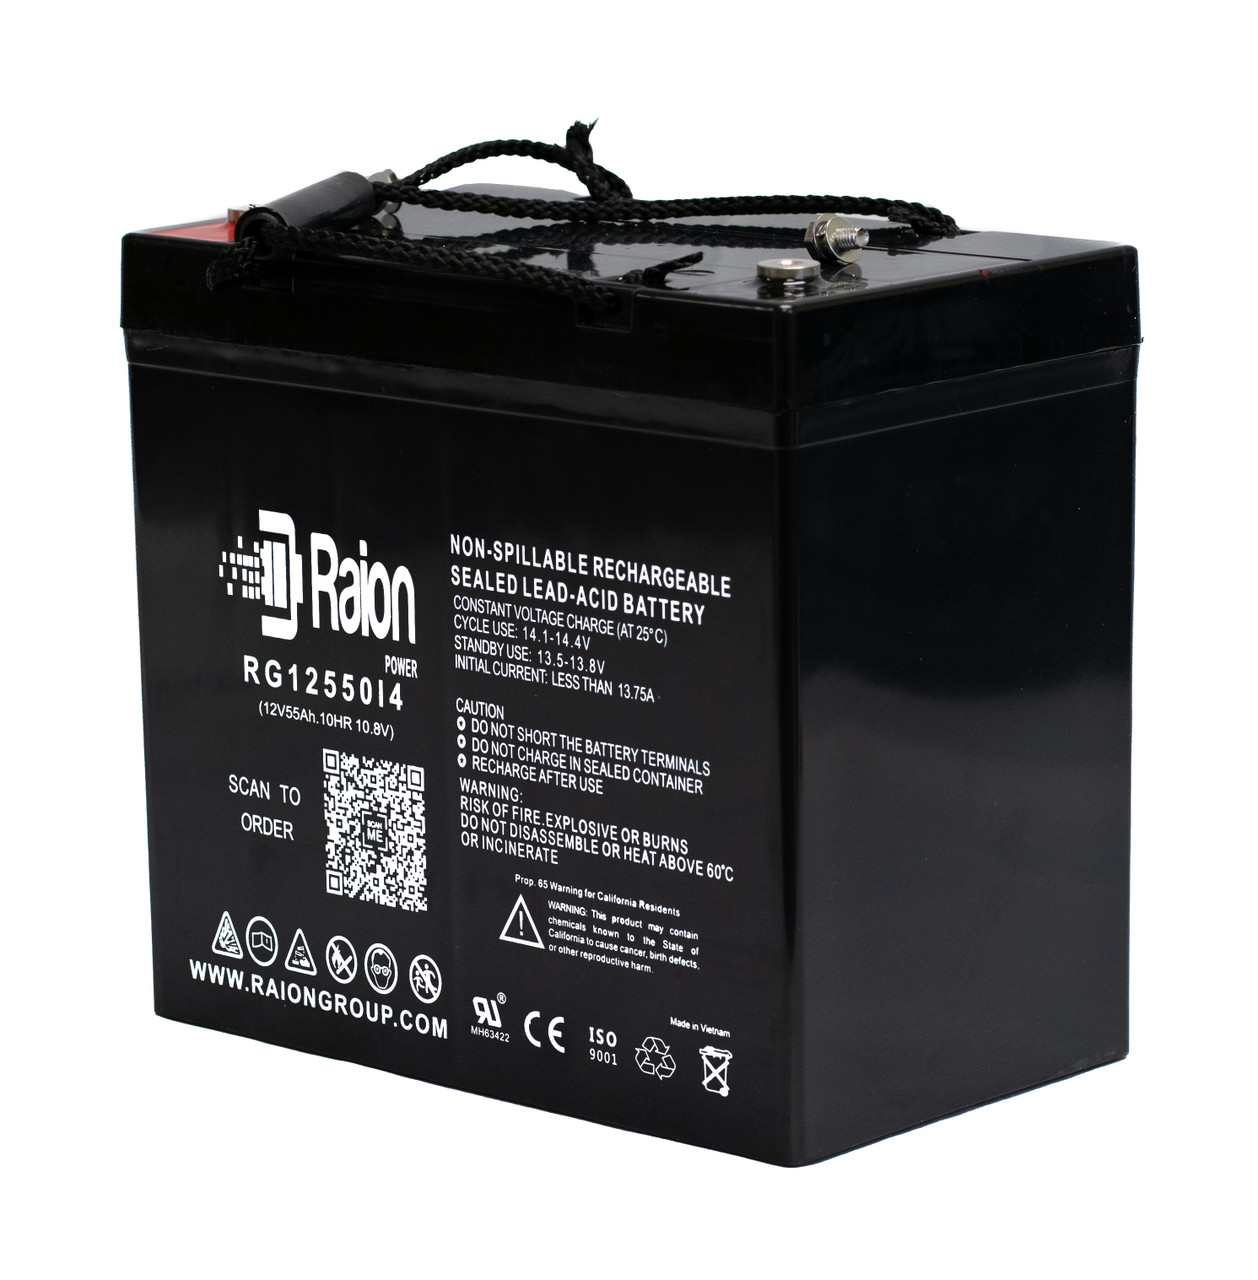 Raion Power 12V 55Ah 22NF Mobility Scooter Battery Replacement for Fortress Scientific Kids Commuter